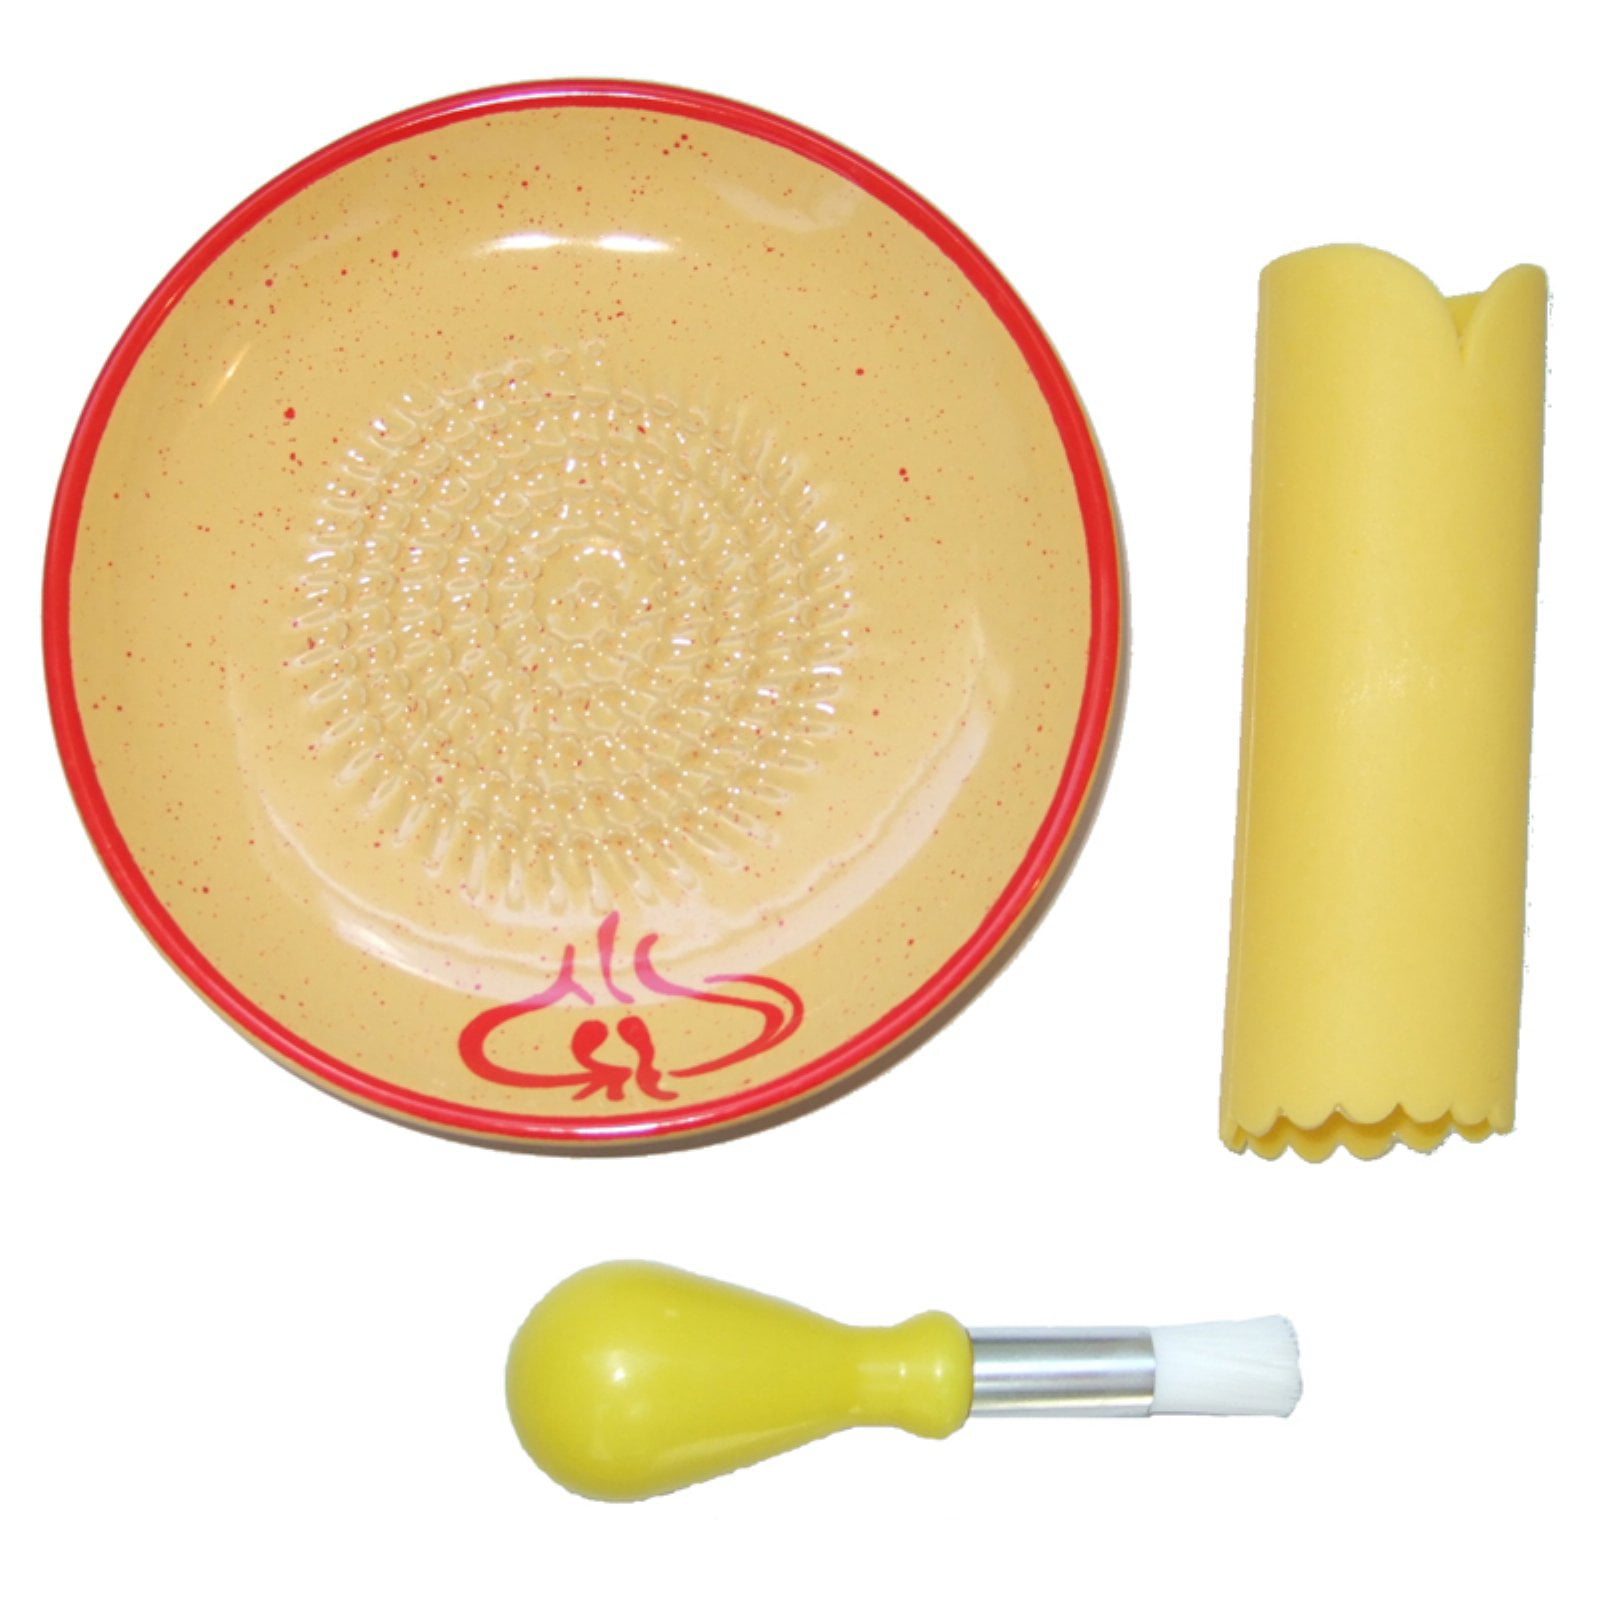 Citrus Ceramic Garlic Grater Plate and Bowls 3 sizes – Good Great Grater